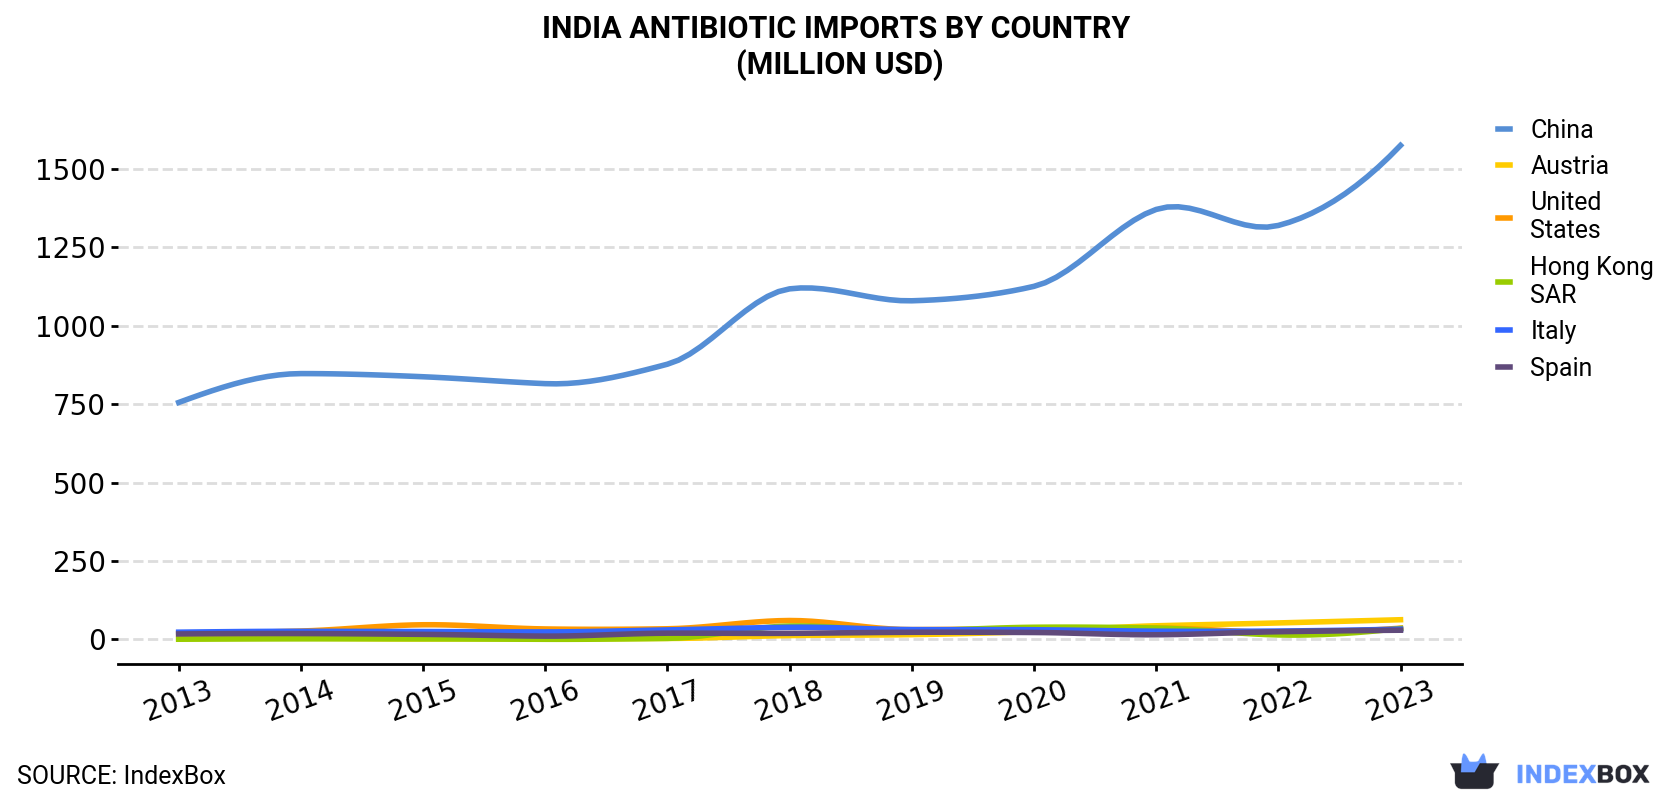 India Antibiotic Imports By Country (Million USD)